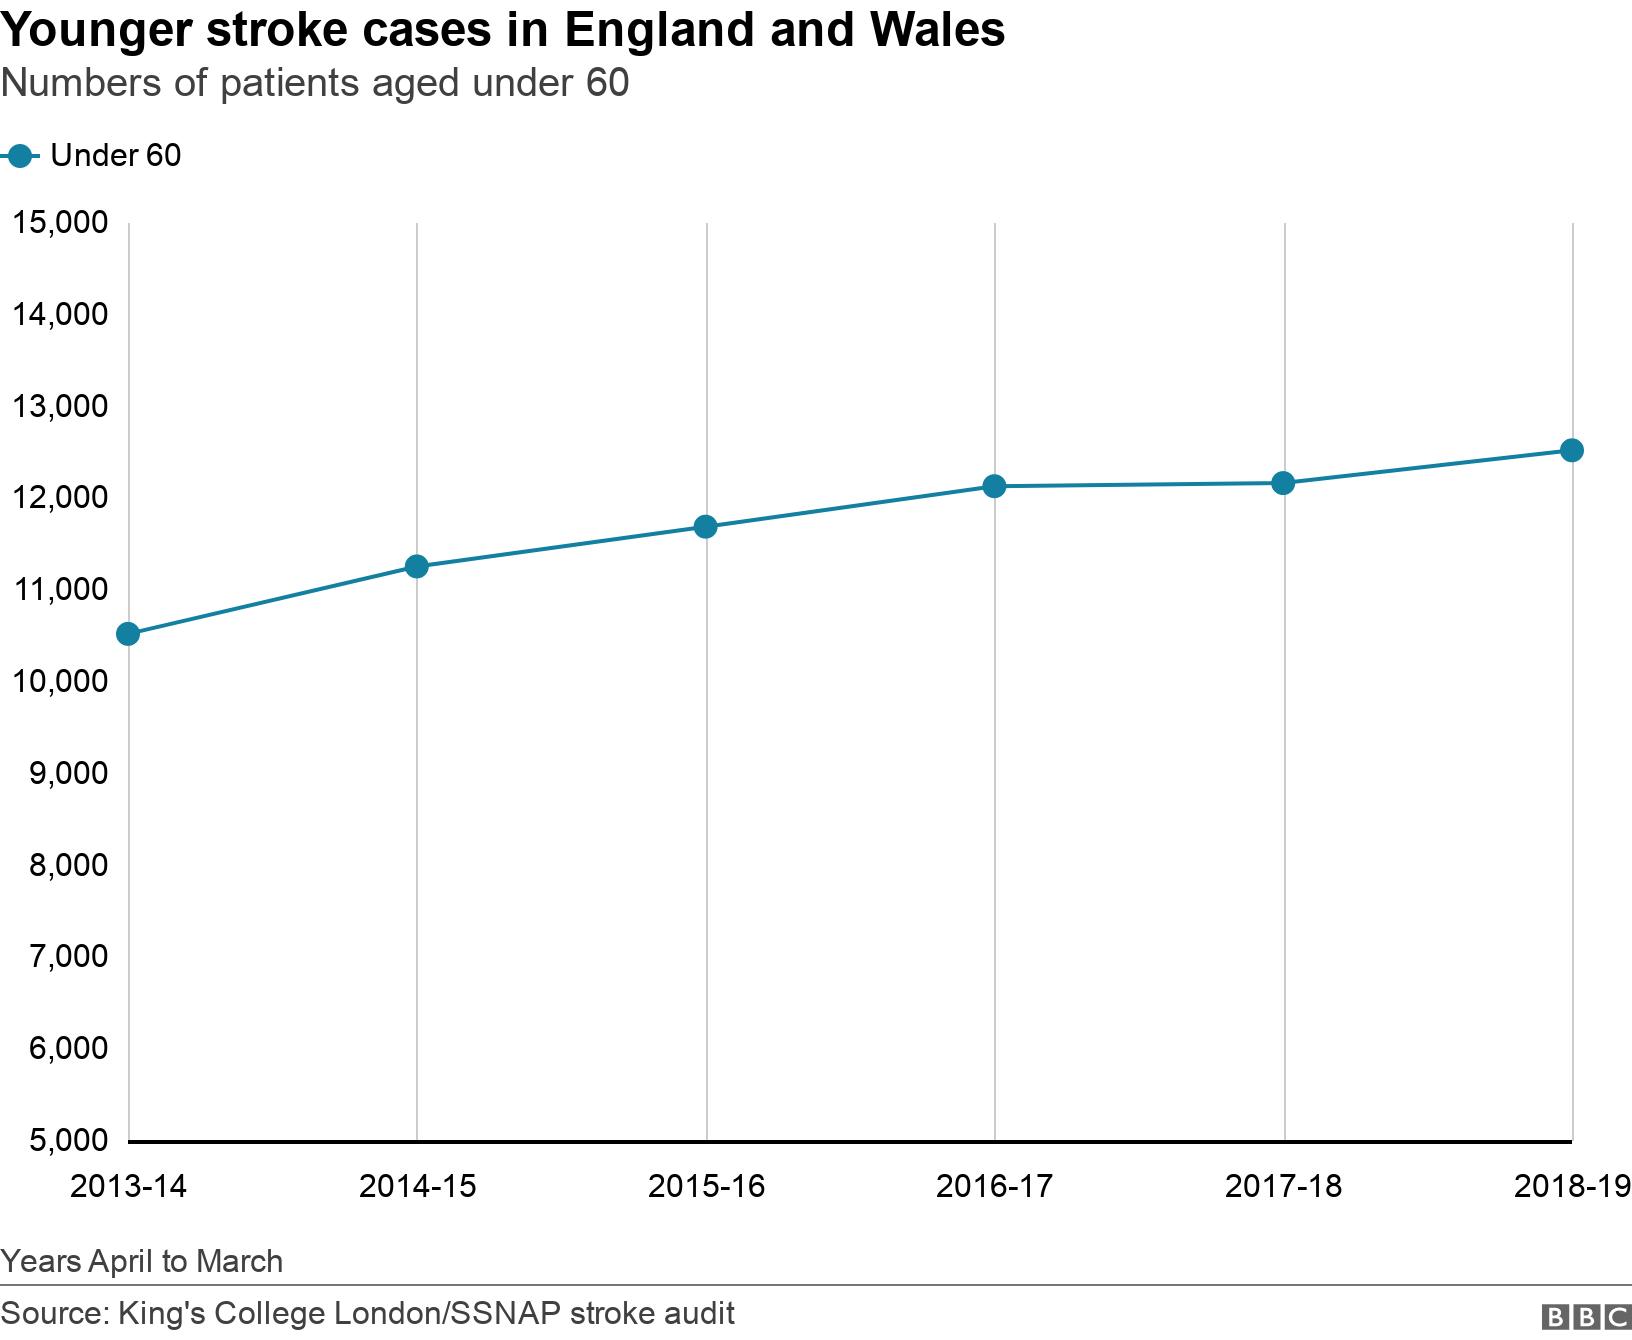 Younger stroke cases in England and Wales. Numbers of patients aged under 60.  Years April to March.